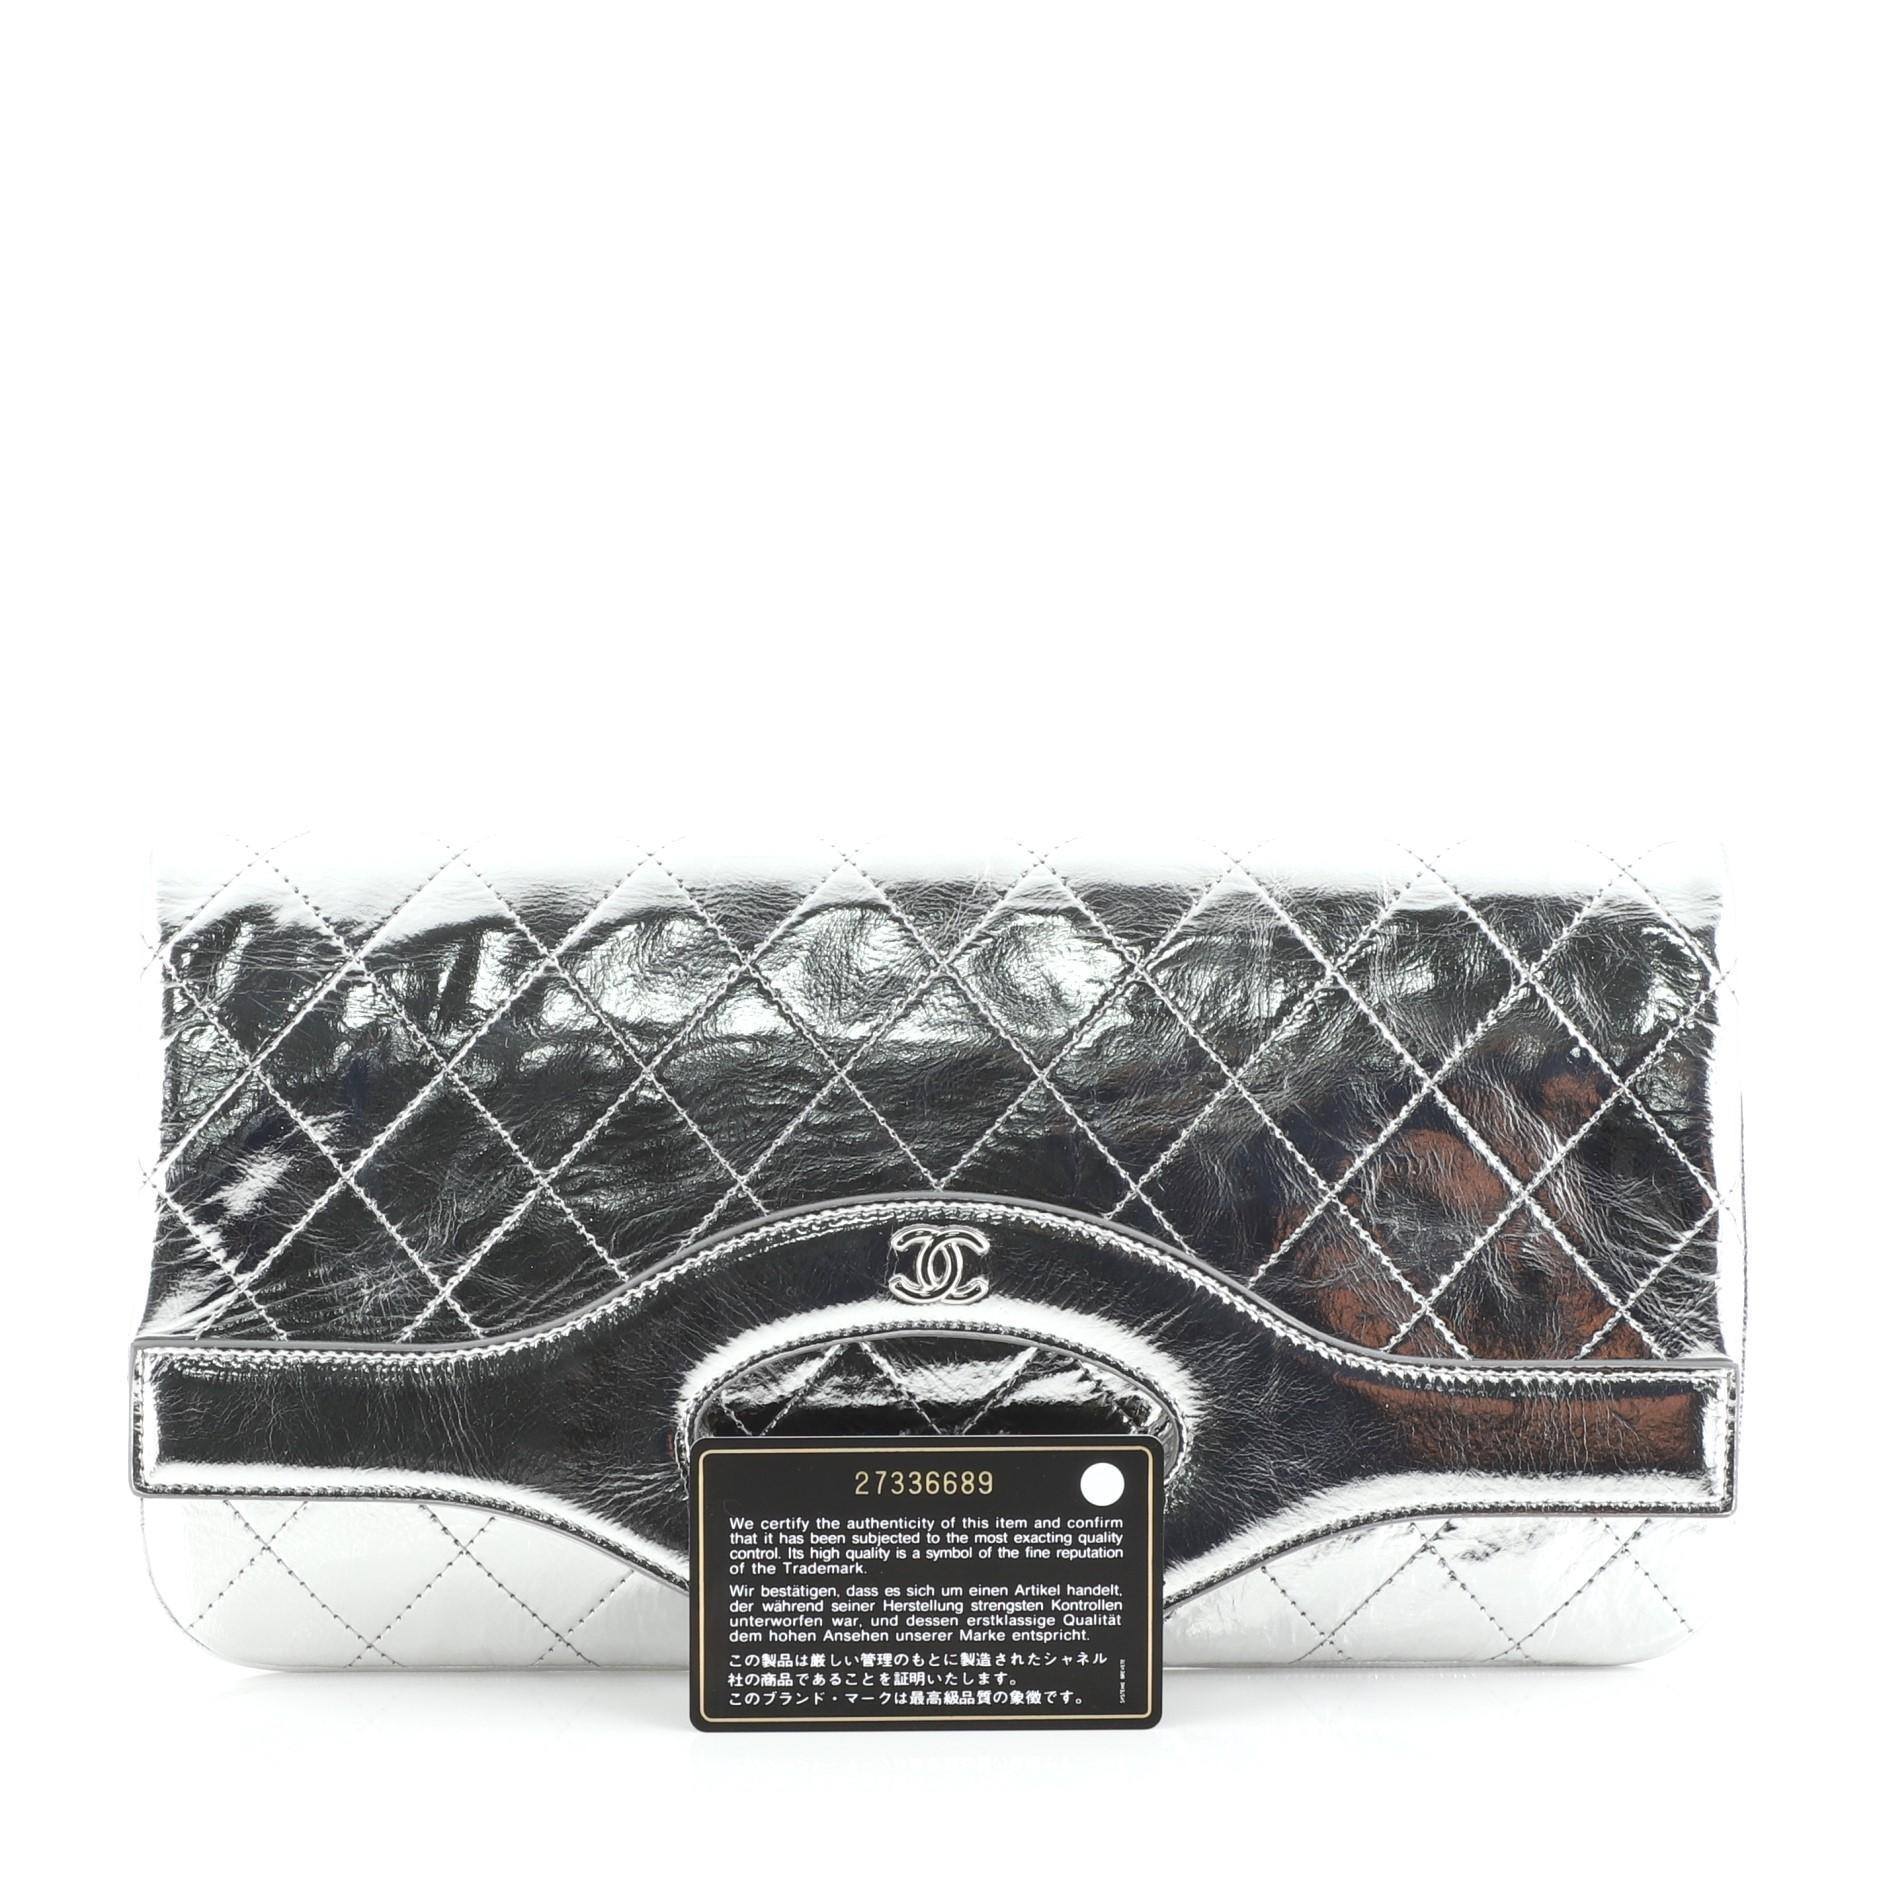 This Chanel 31 Pouch Quilted Metallic Calfskin Medium, crafted in silver quilted calfskin leather, features cutout leather handles and silver-tone hardware. Its fold-over top opens to a gray fabric interior. Hologram sticker reads: 27336689.